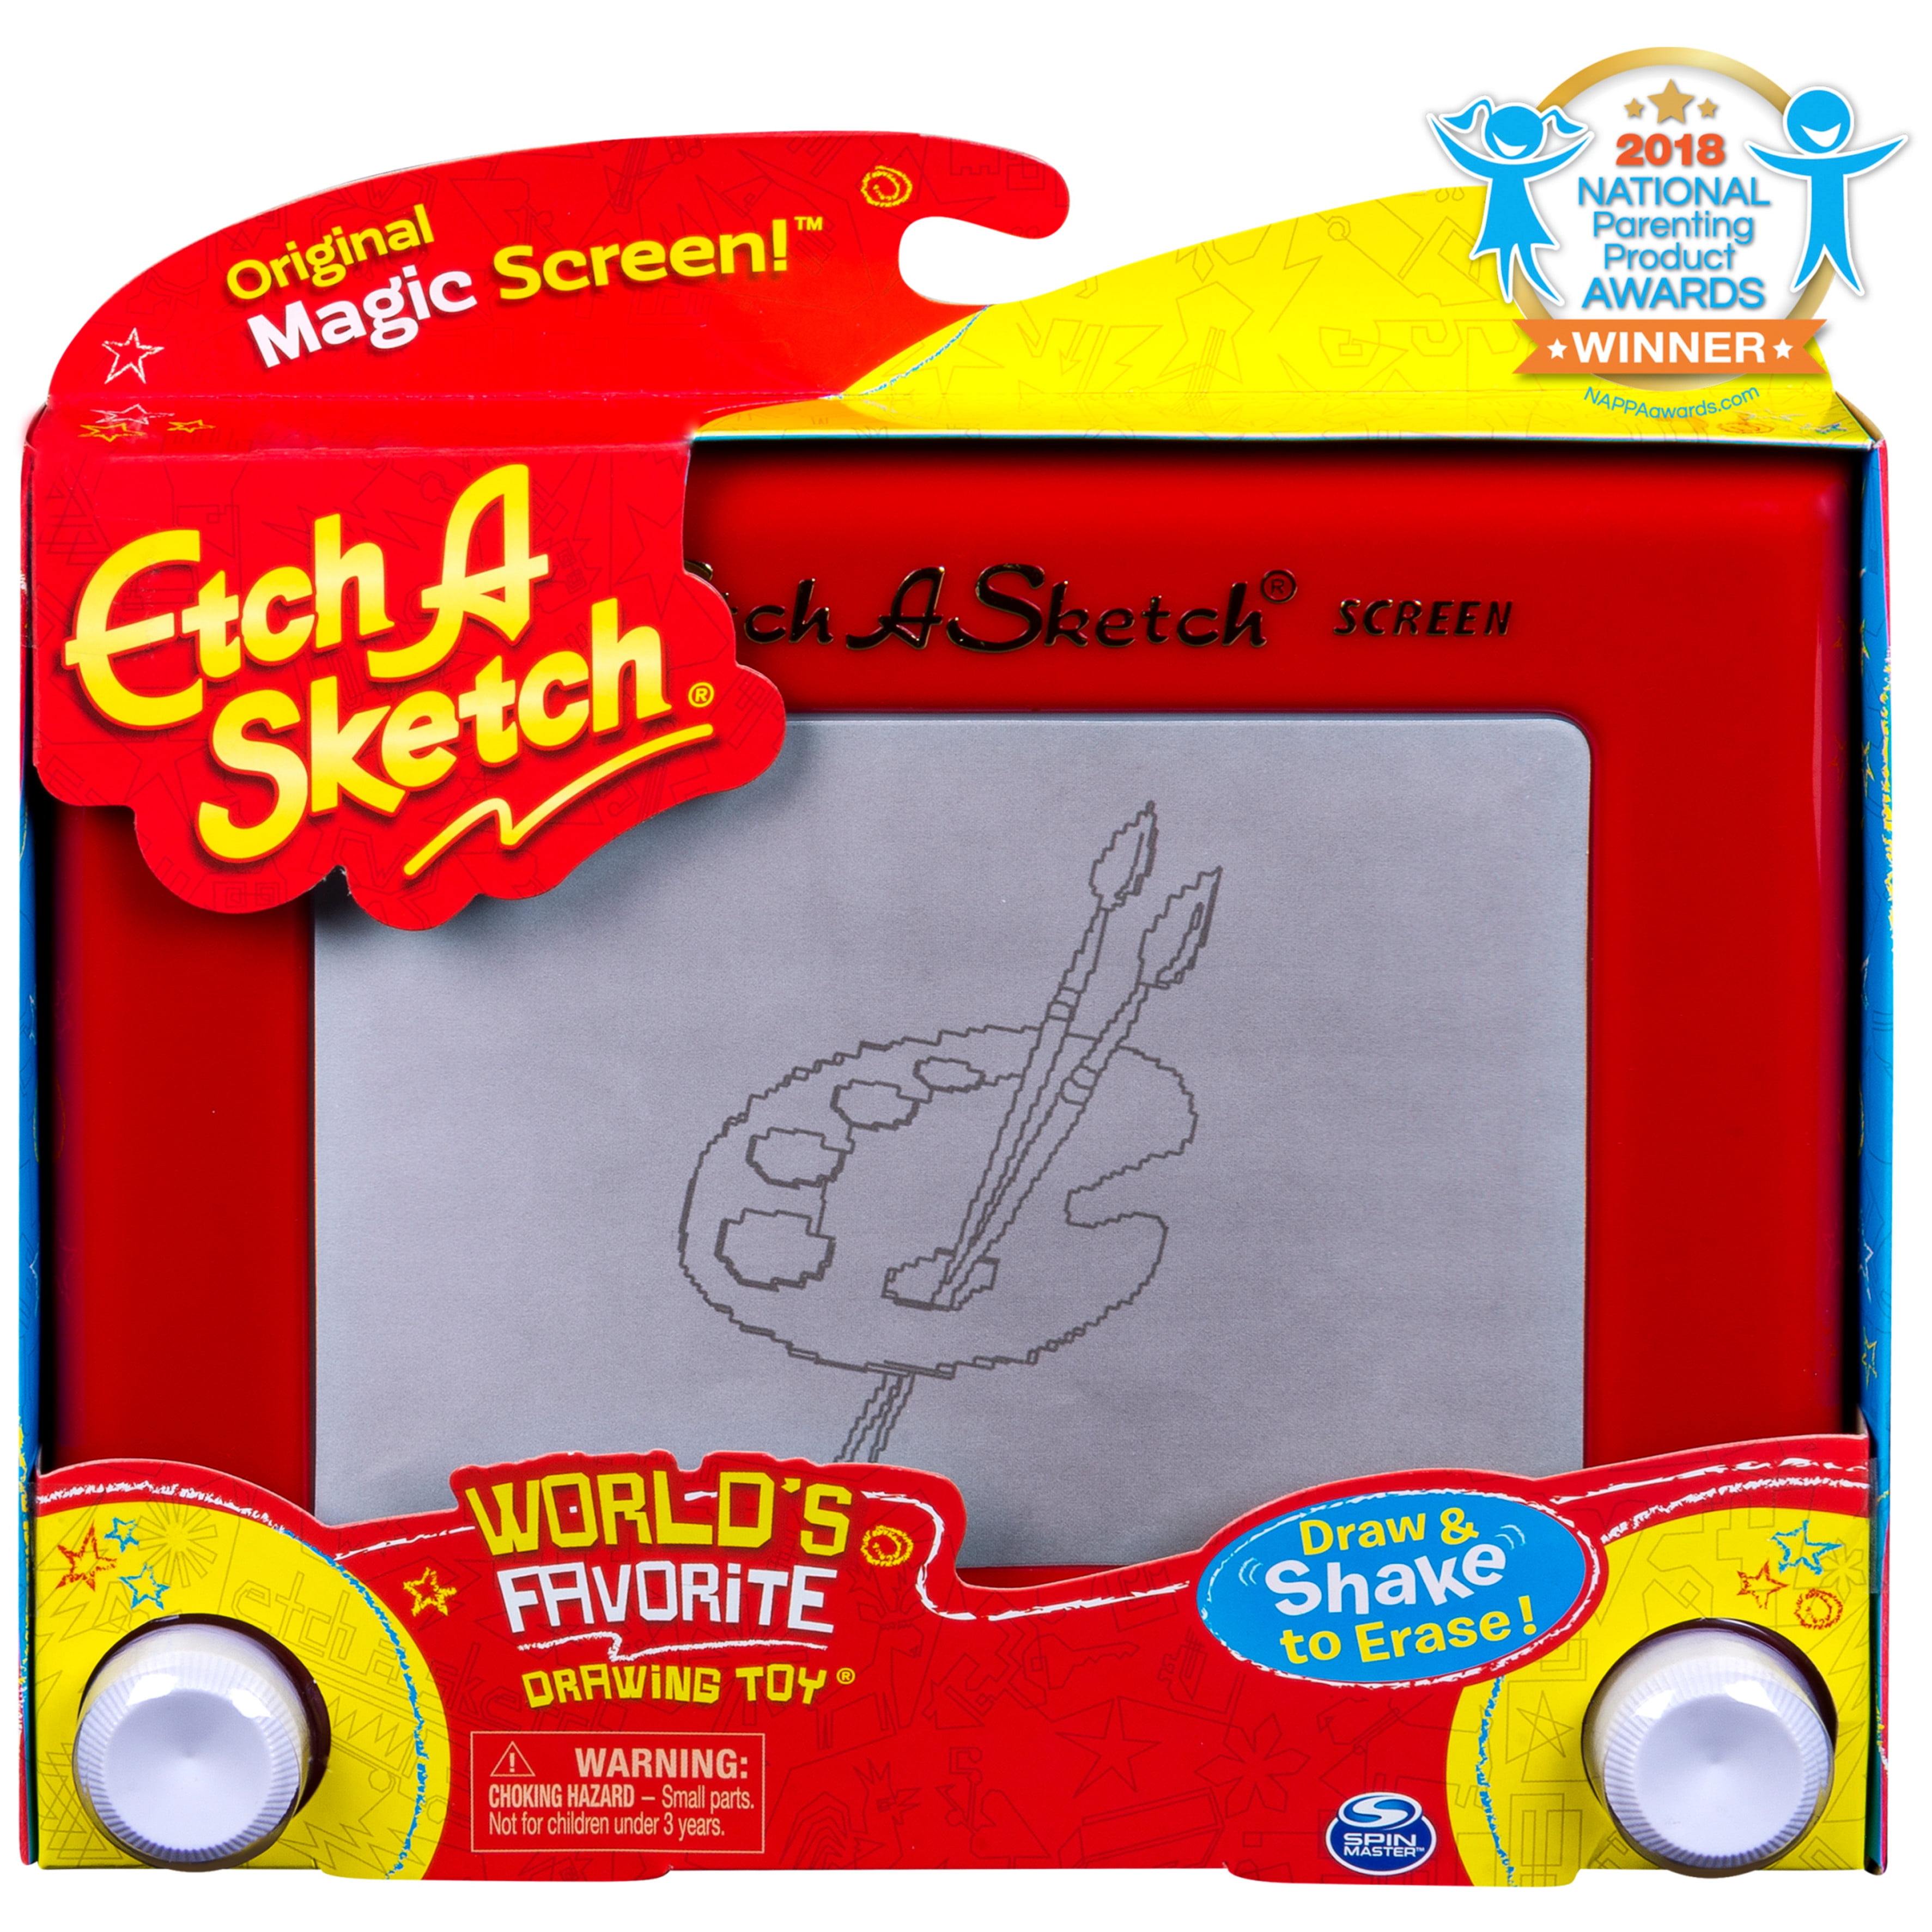 Etch A Sketch Revolution Review: A Great $10 Impulse Buy